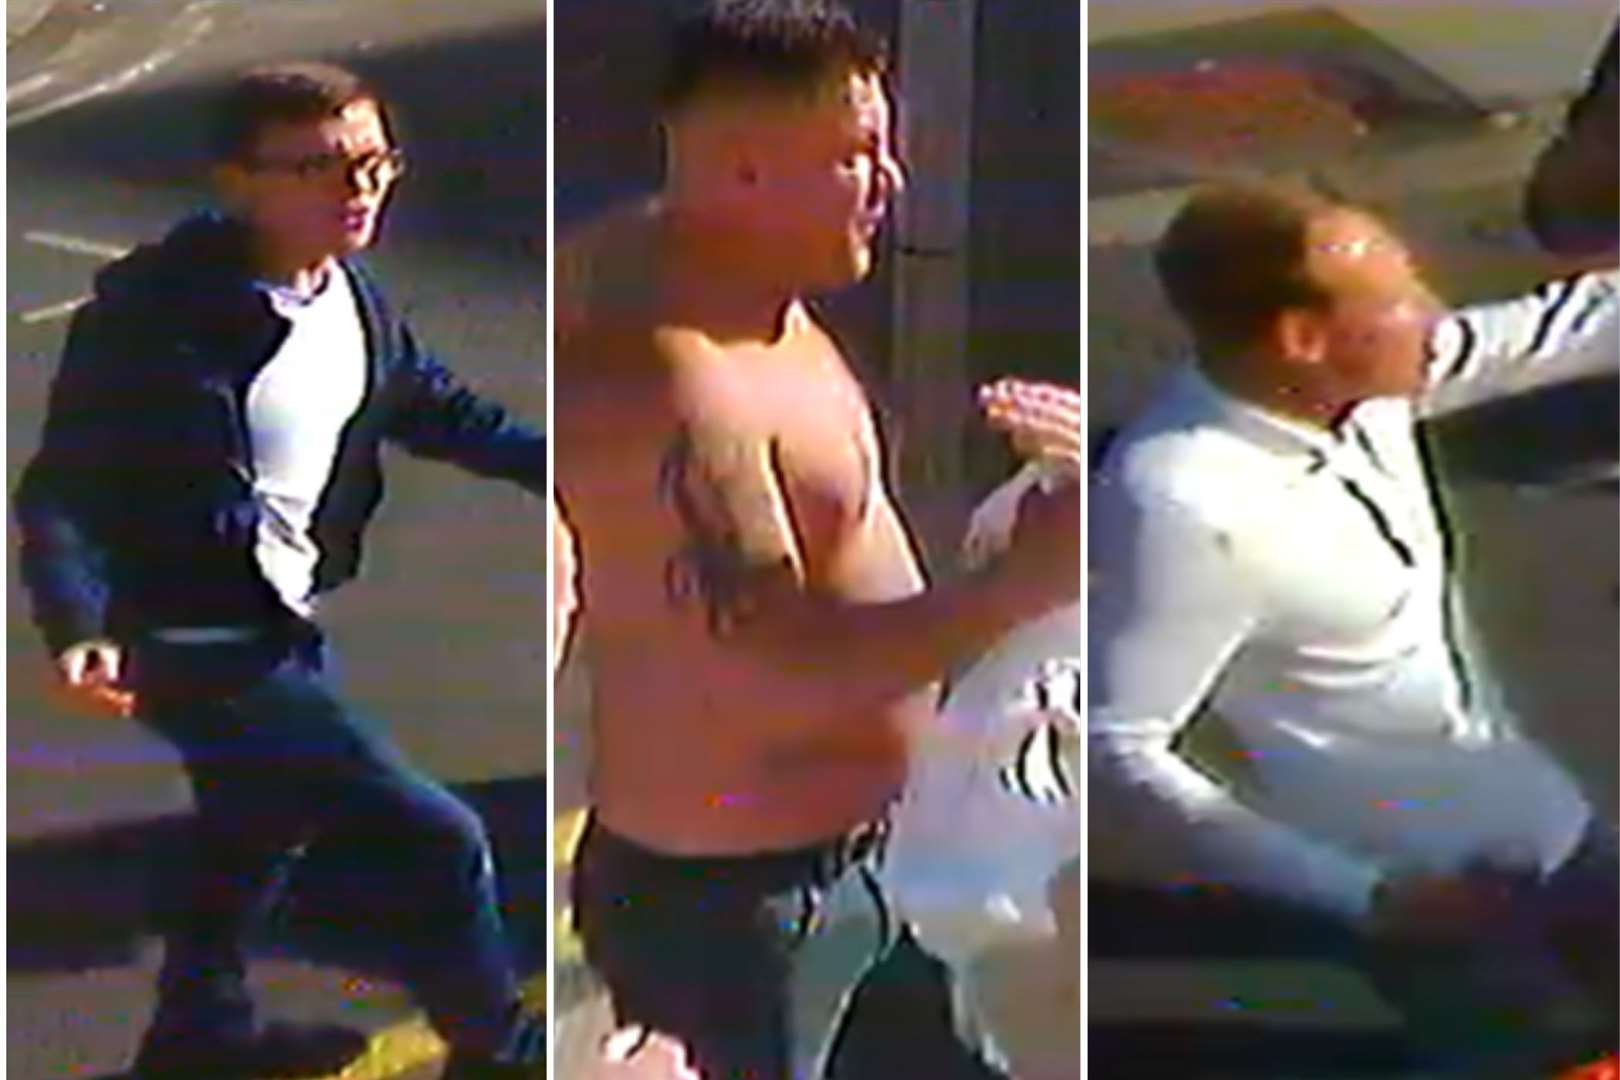 Police want to question these three men about racist attacks in Folkestone. Photo: Kent Police